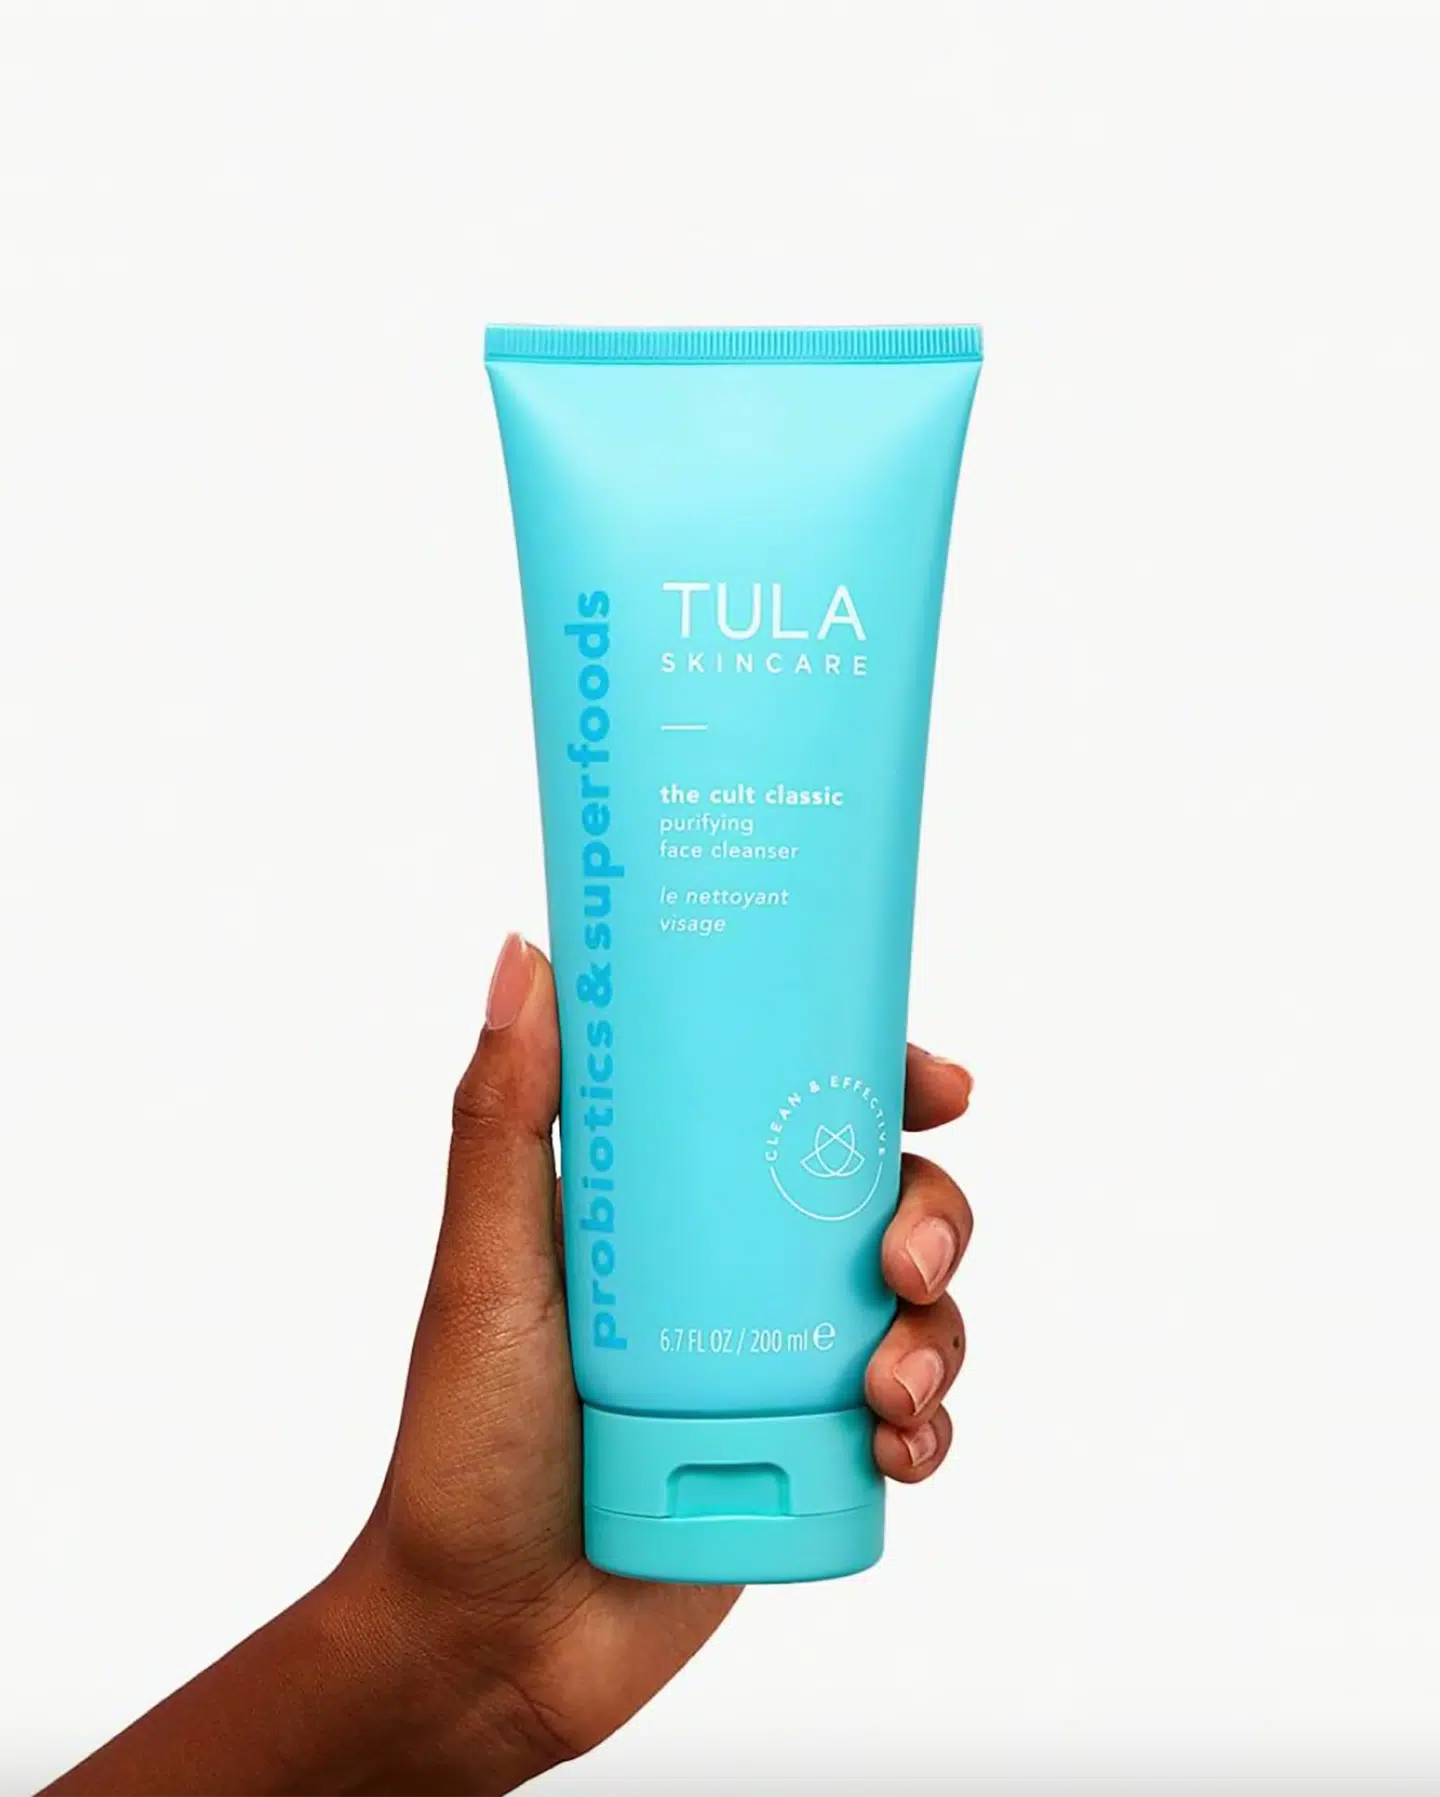 TULA skincare reviews, by beauty blogger What The Fab